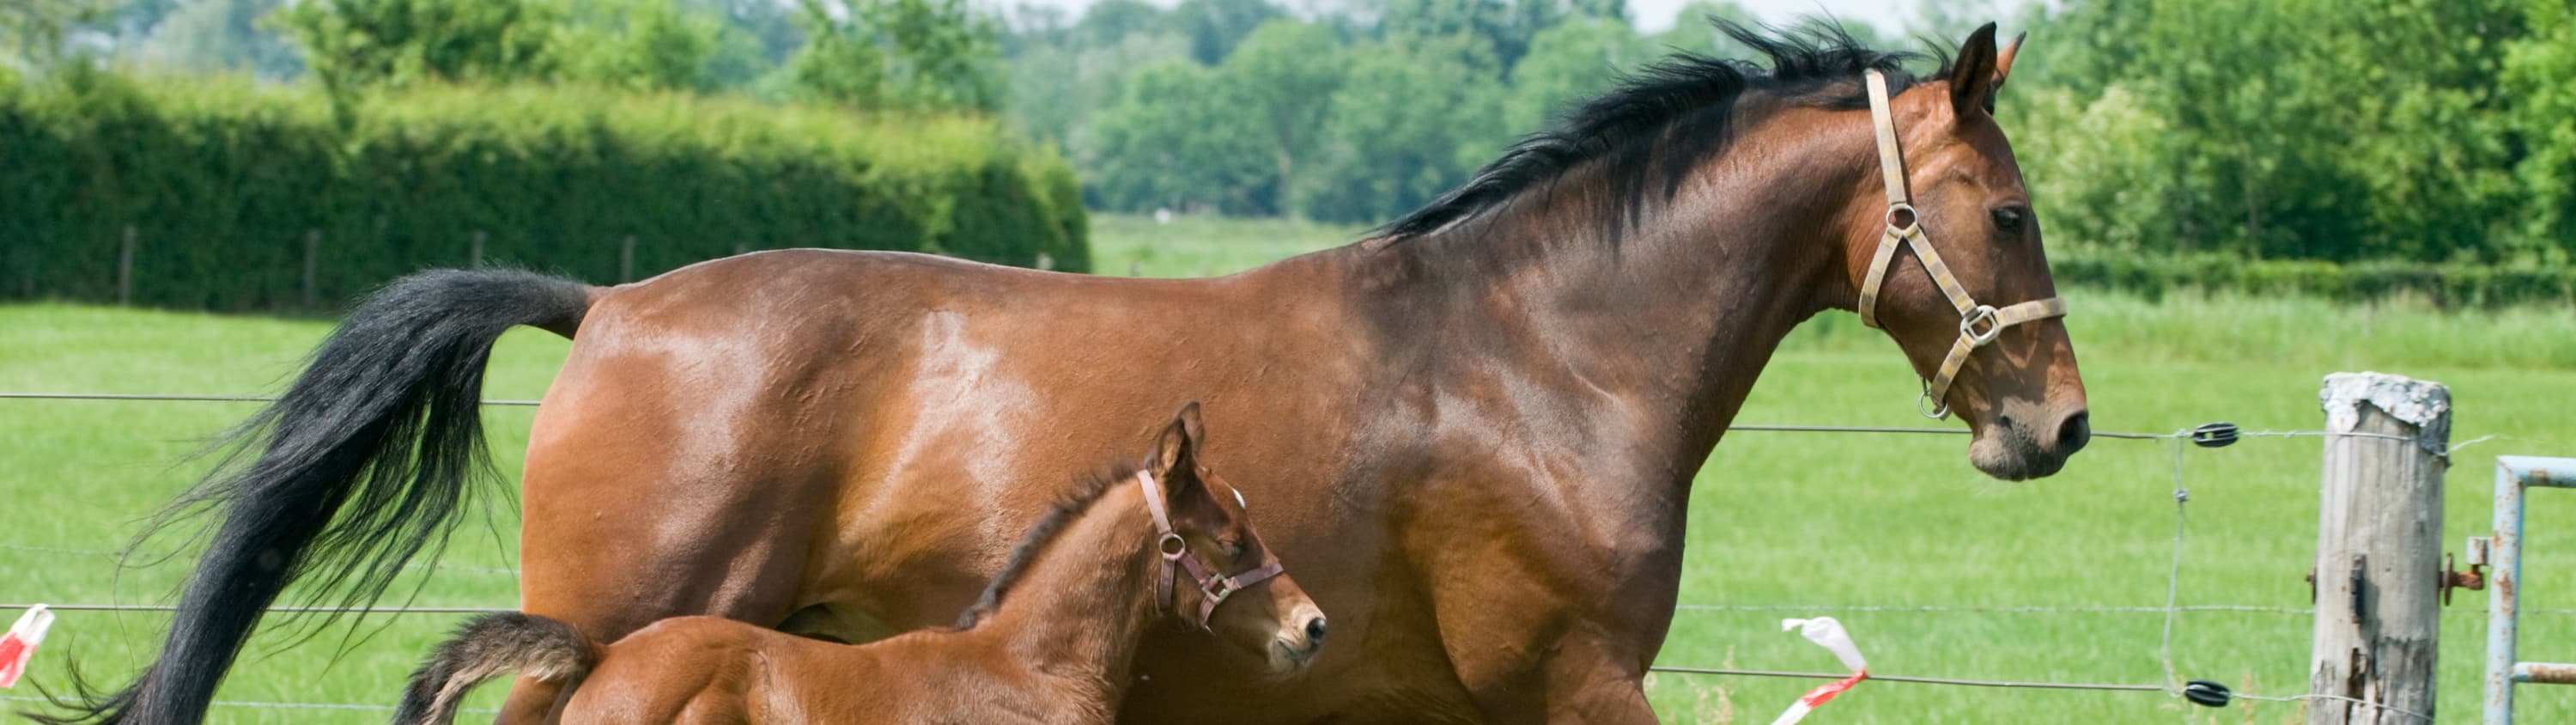 Horse and foal4